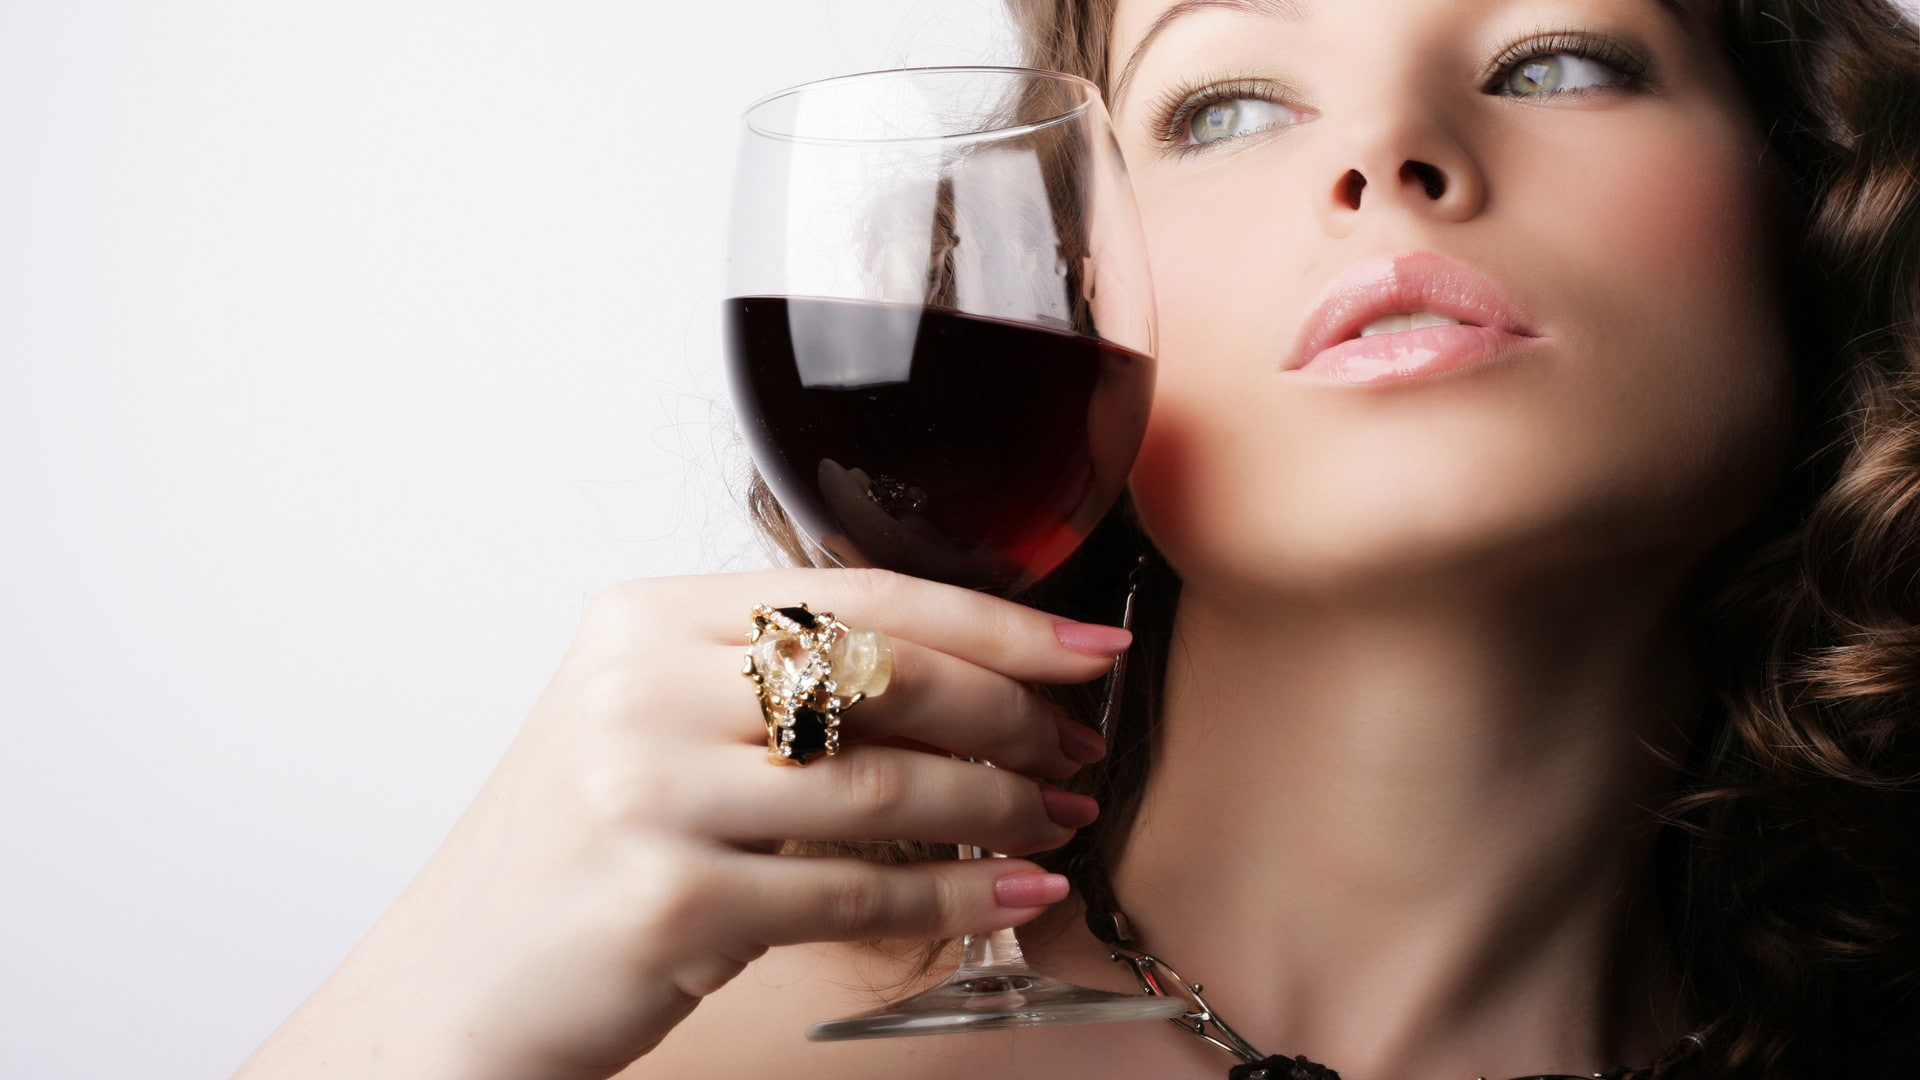 wine, glass, women, necklace, face, painted nails, model, refreshment